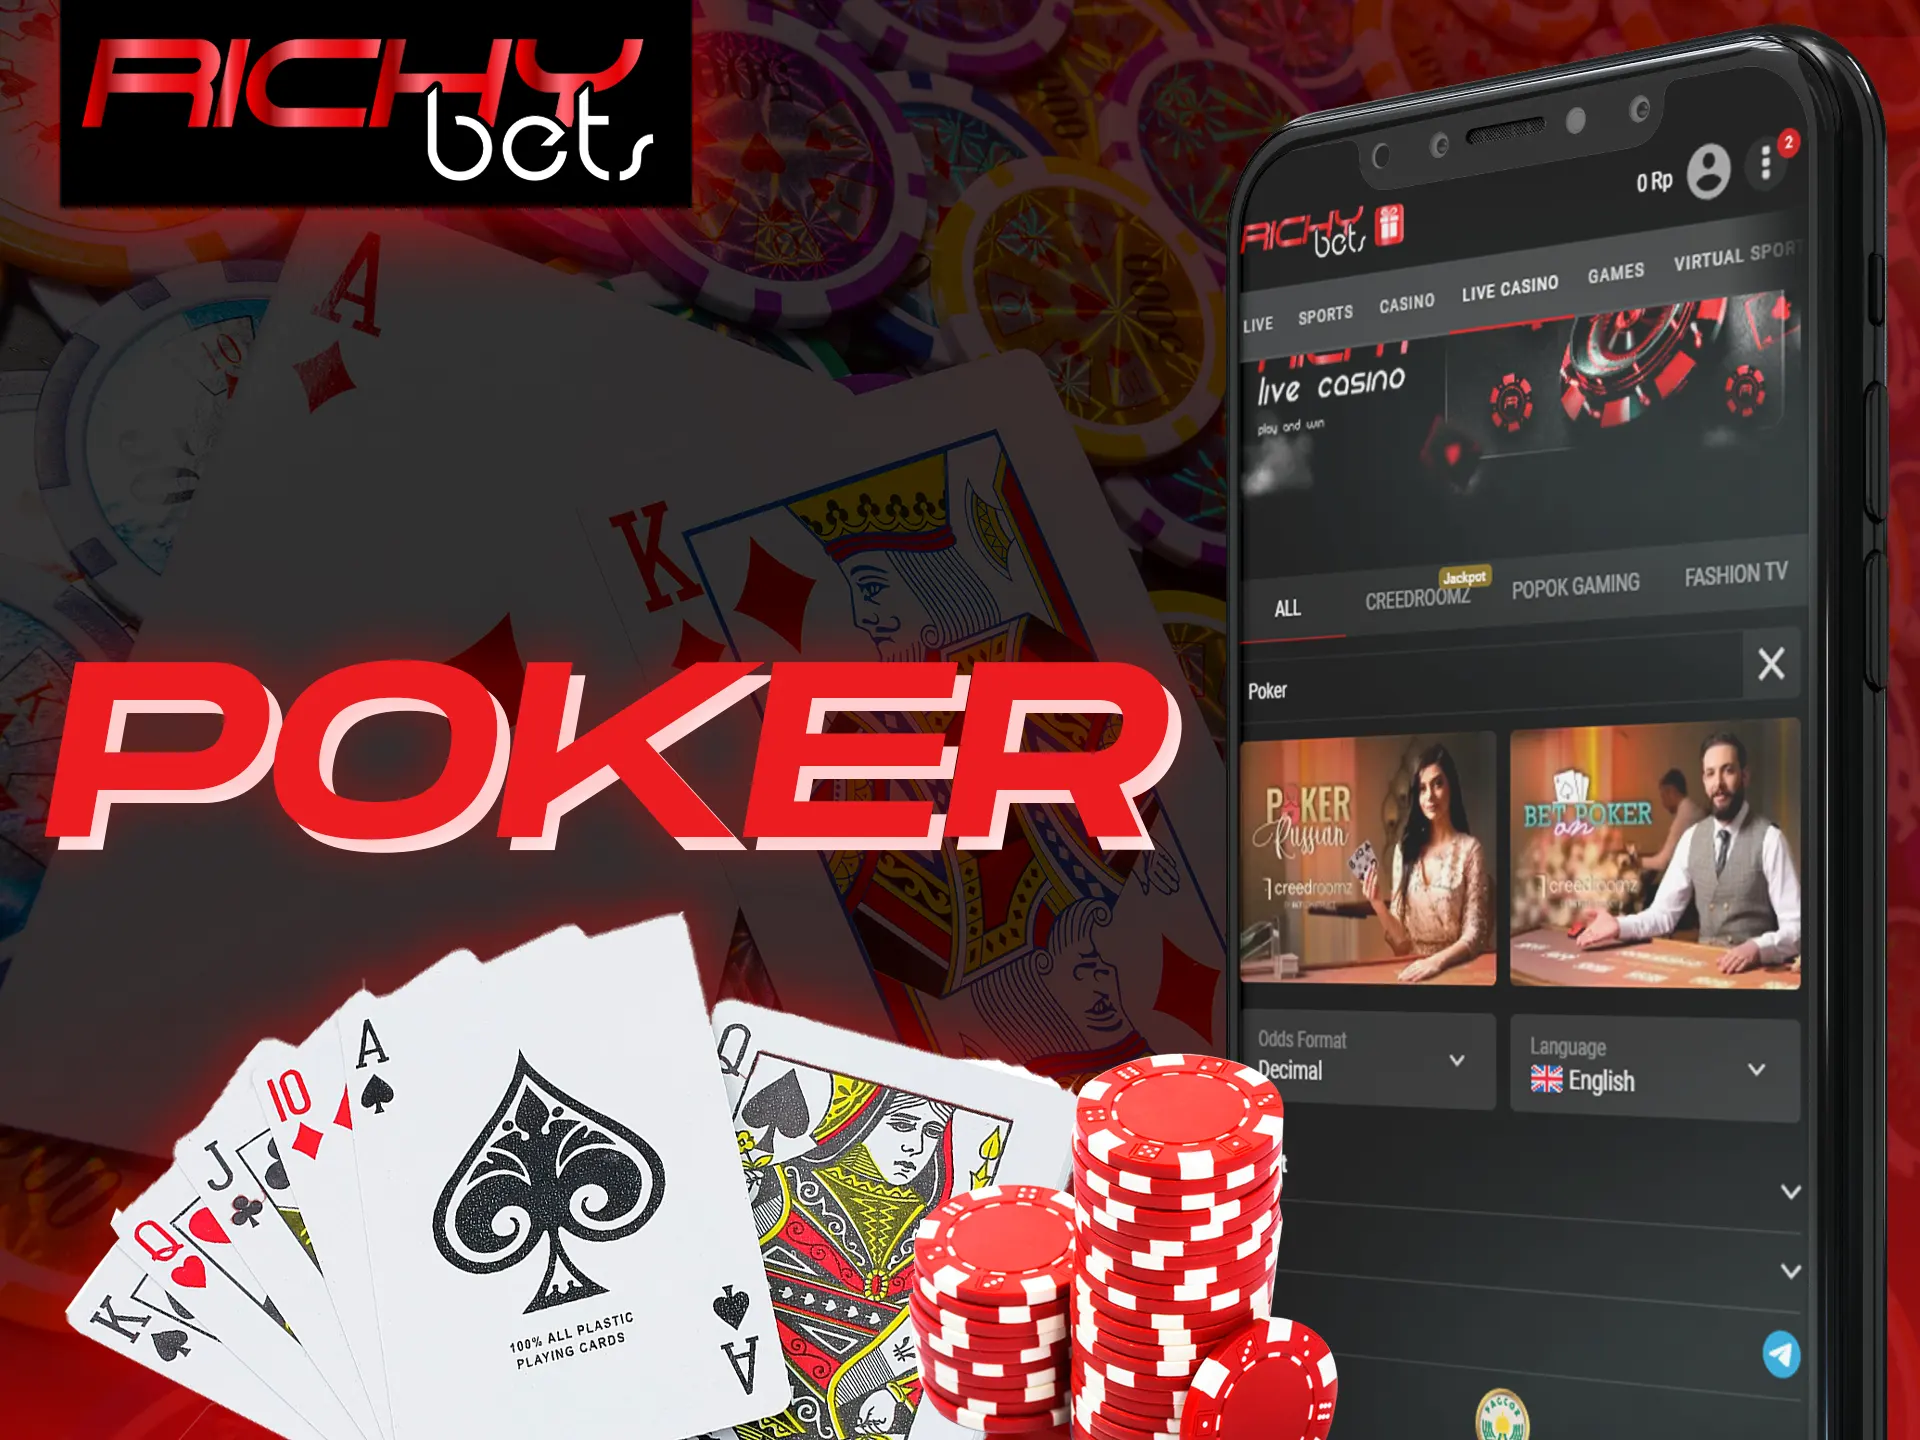 Play poker at the Richybets using a special app.